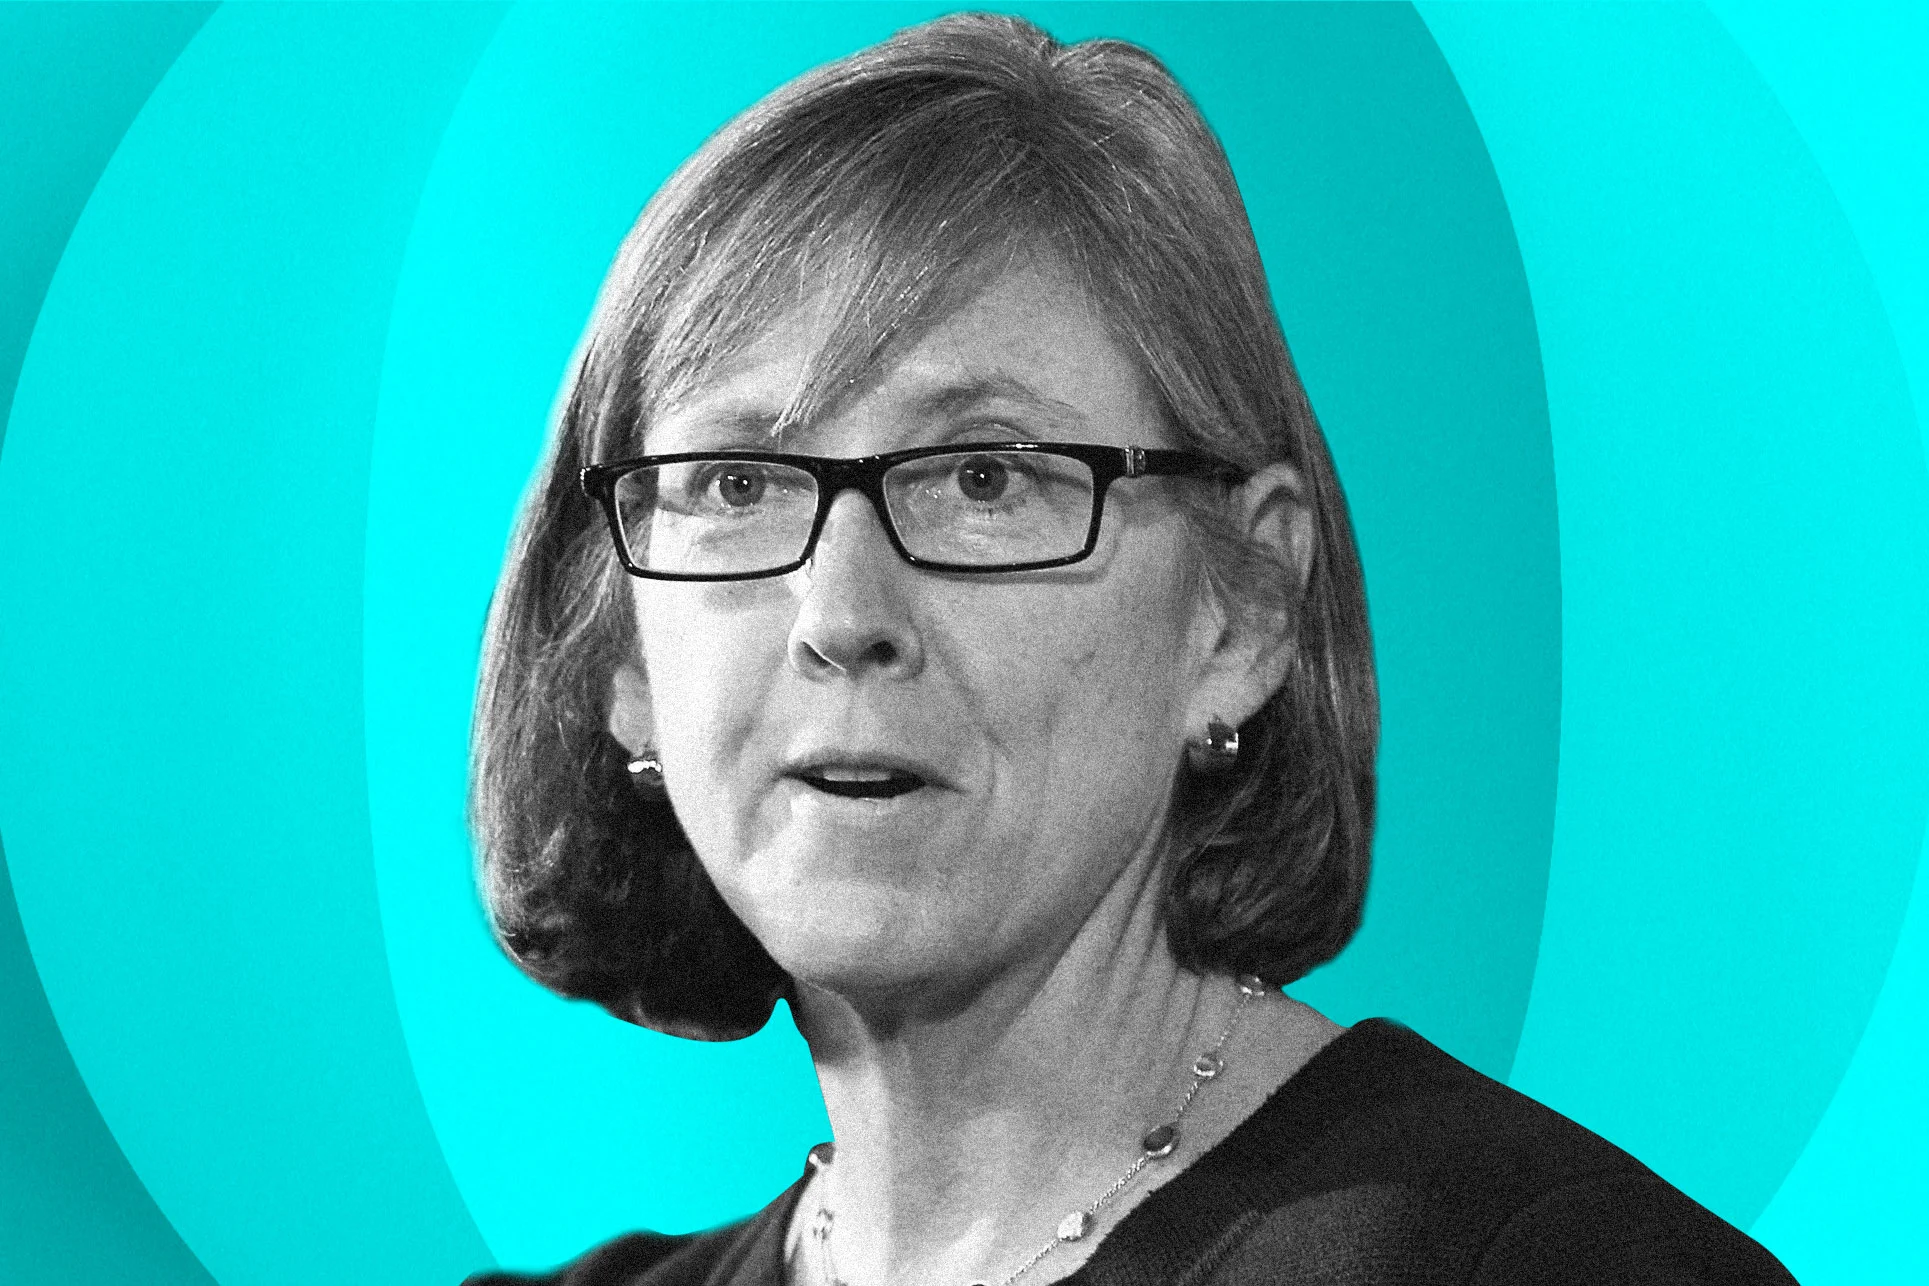 What Mary Meeker thinks about venture capital